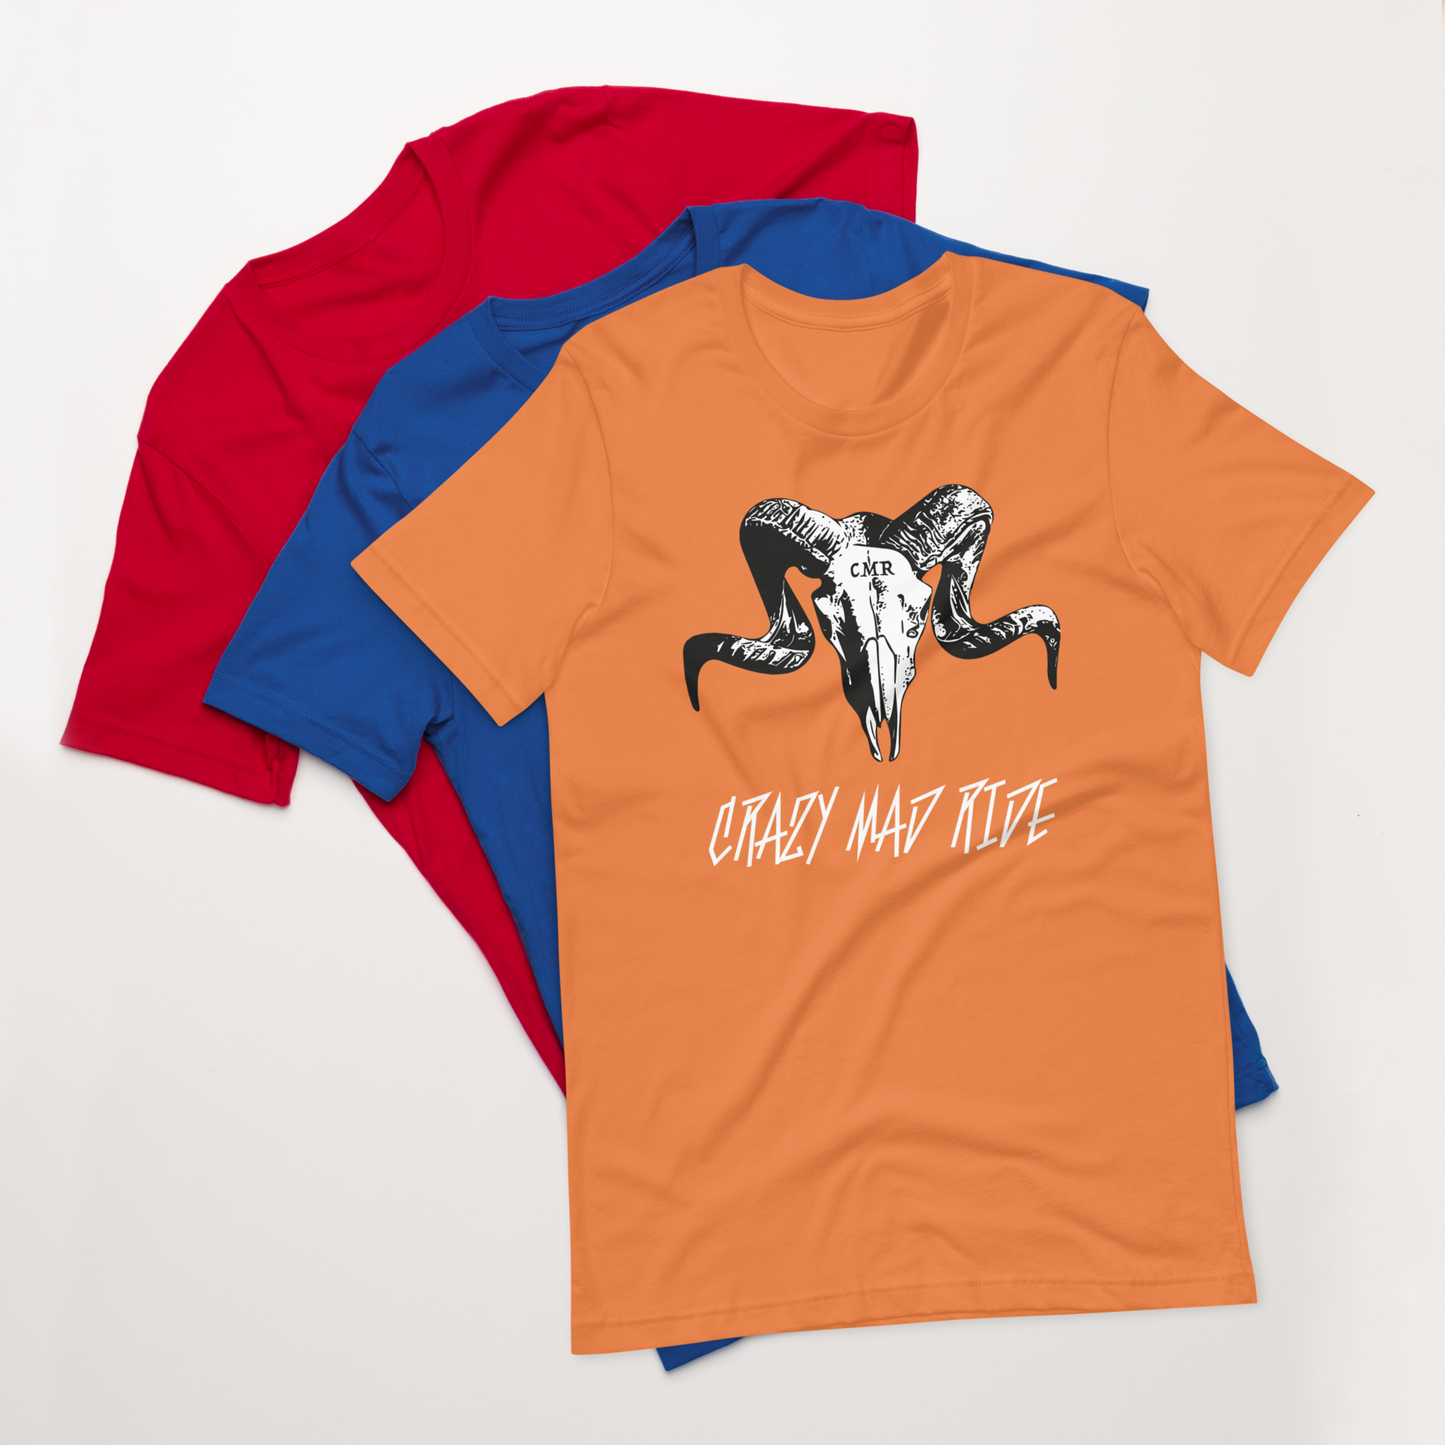 Crazy Mad Ride Lightweight T-Shirt (Color Choices)